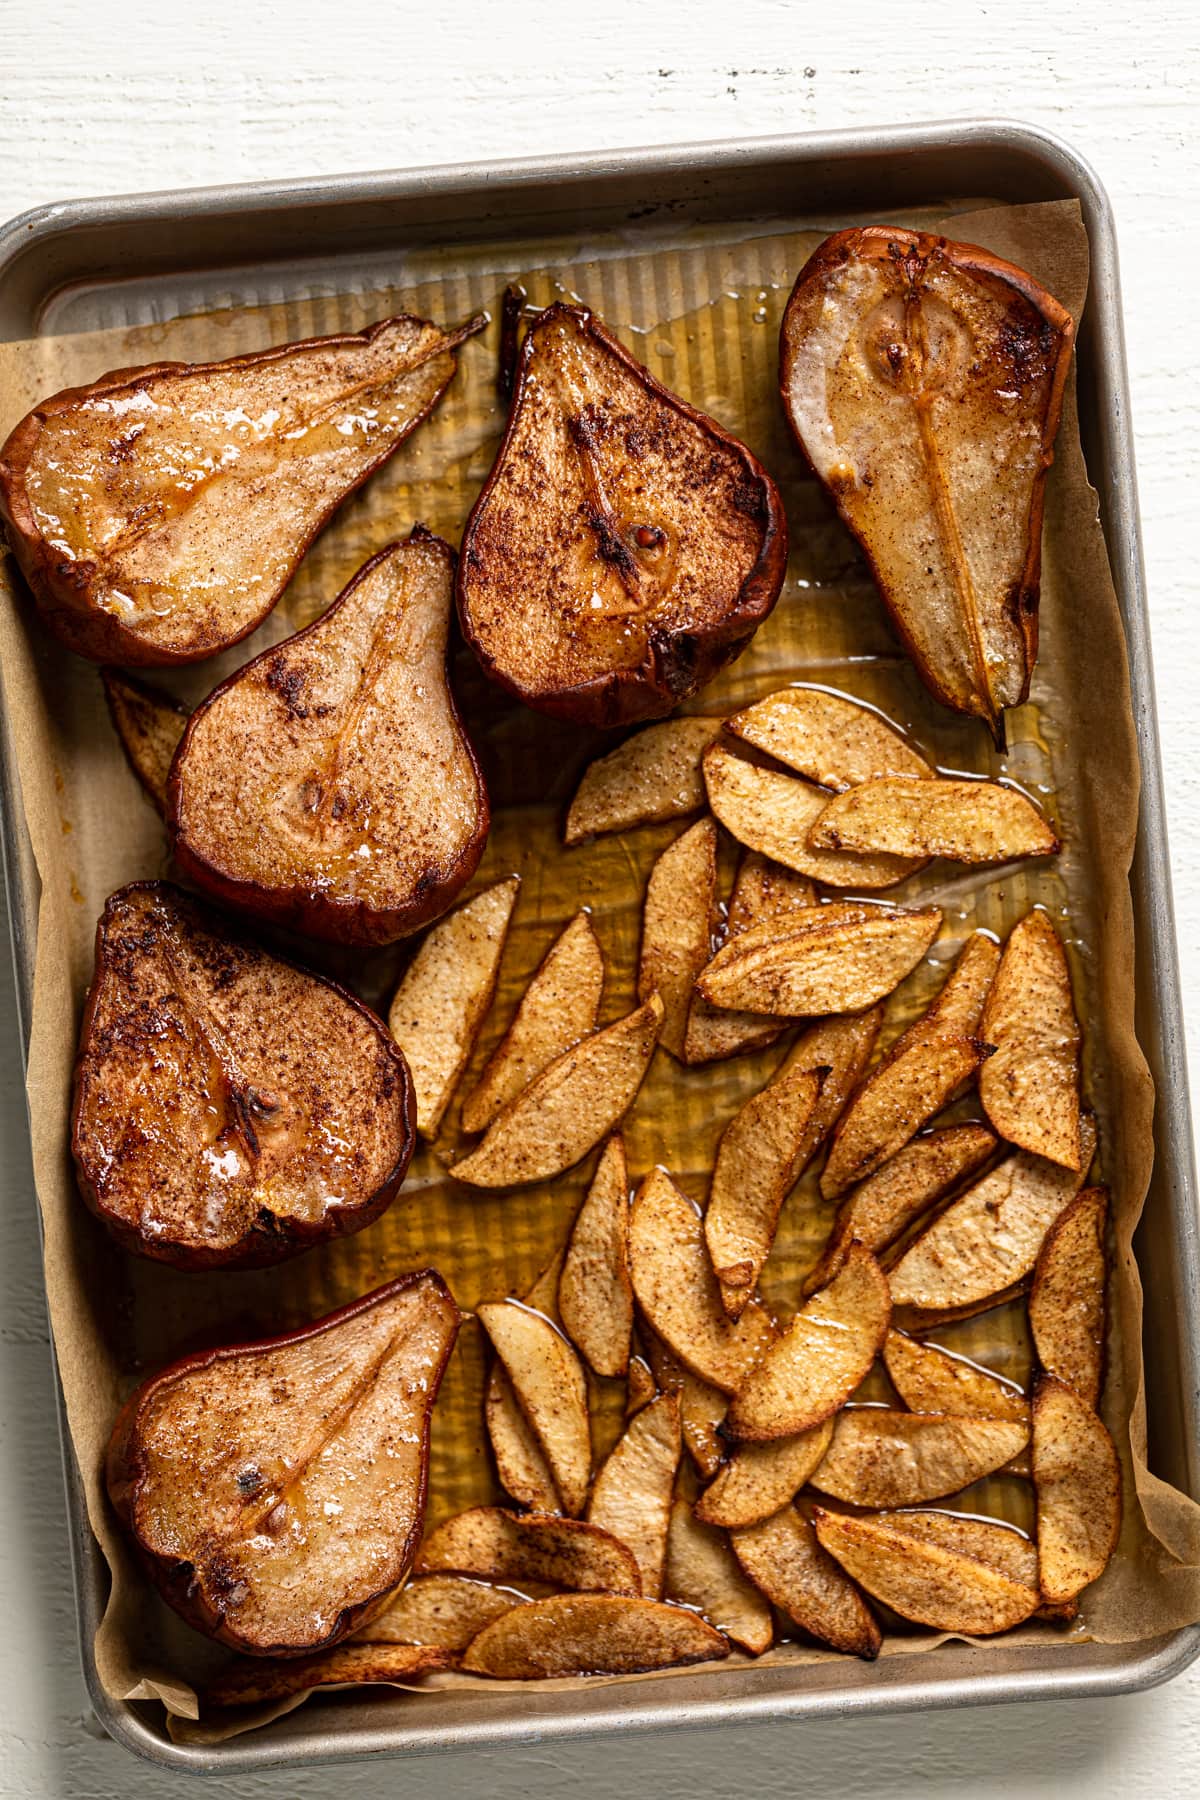 Roasted pears on a baking sheet